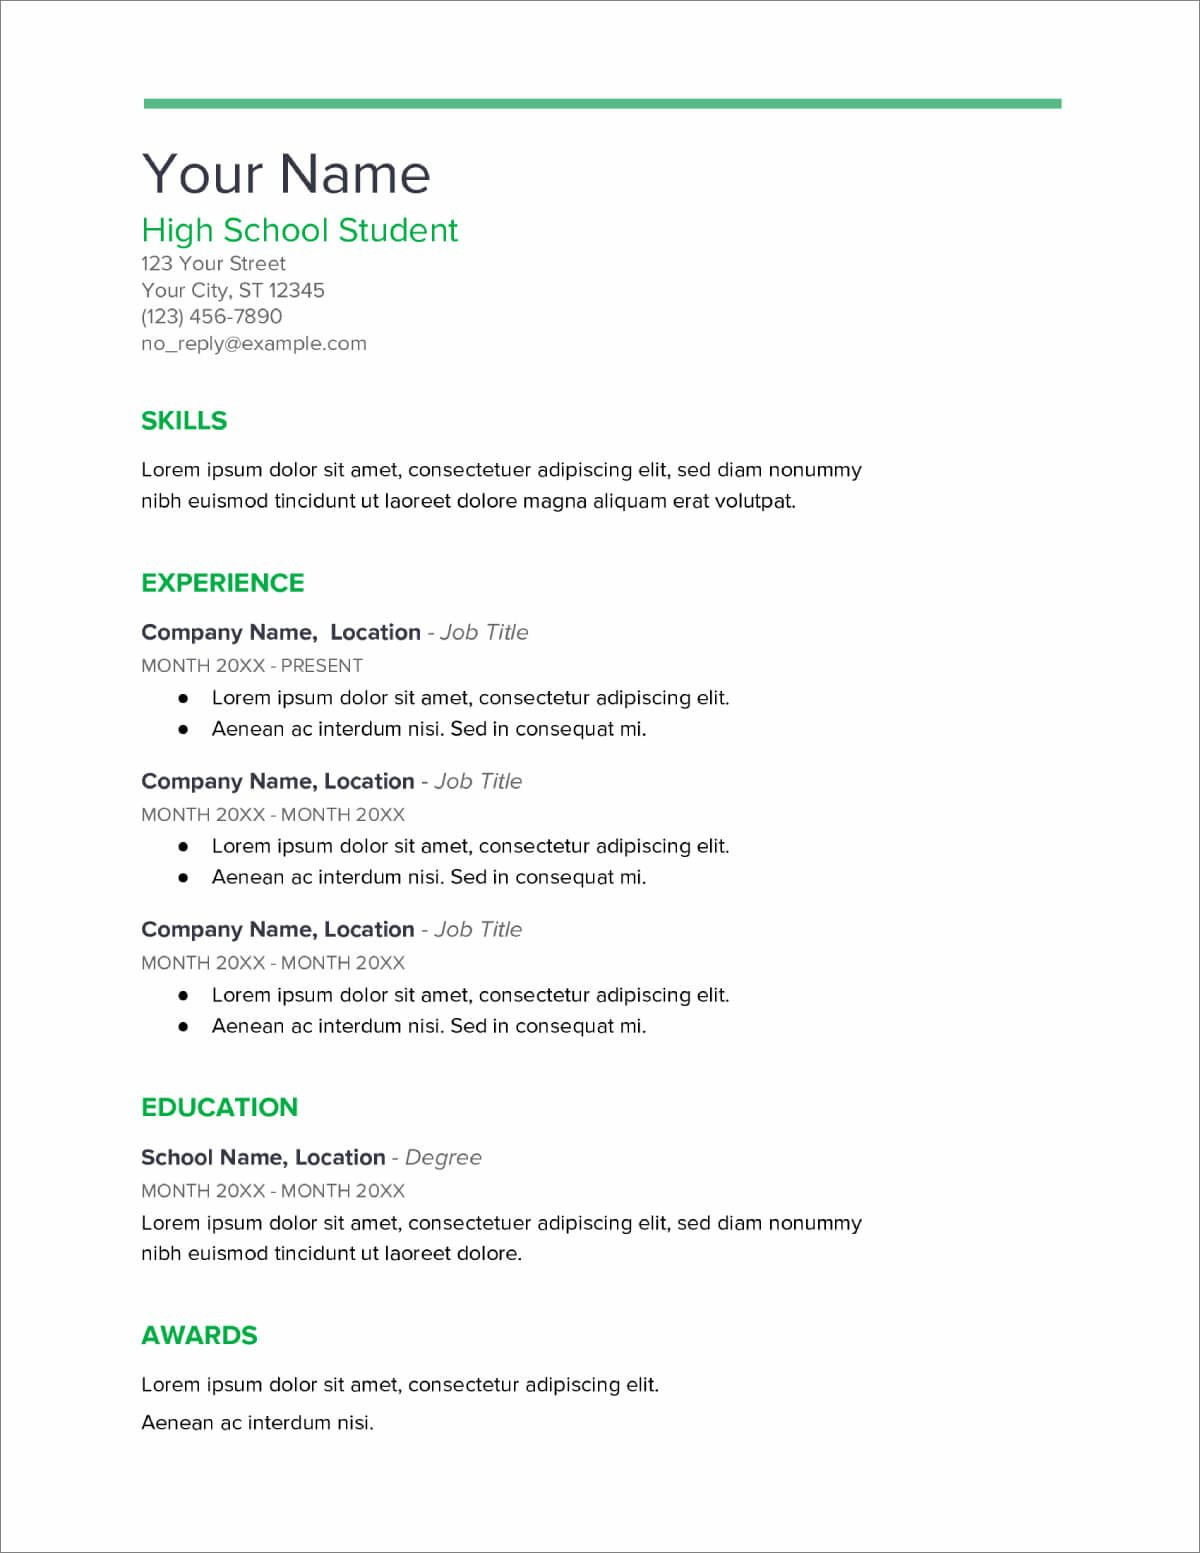 Basic Resume Template for High School Students 20lancarrezekiq High School Resume Templates [download now]